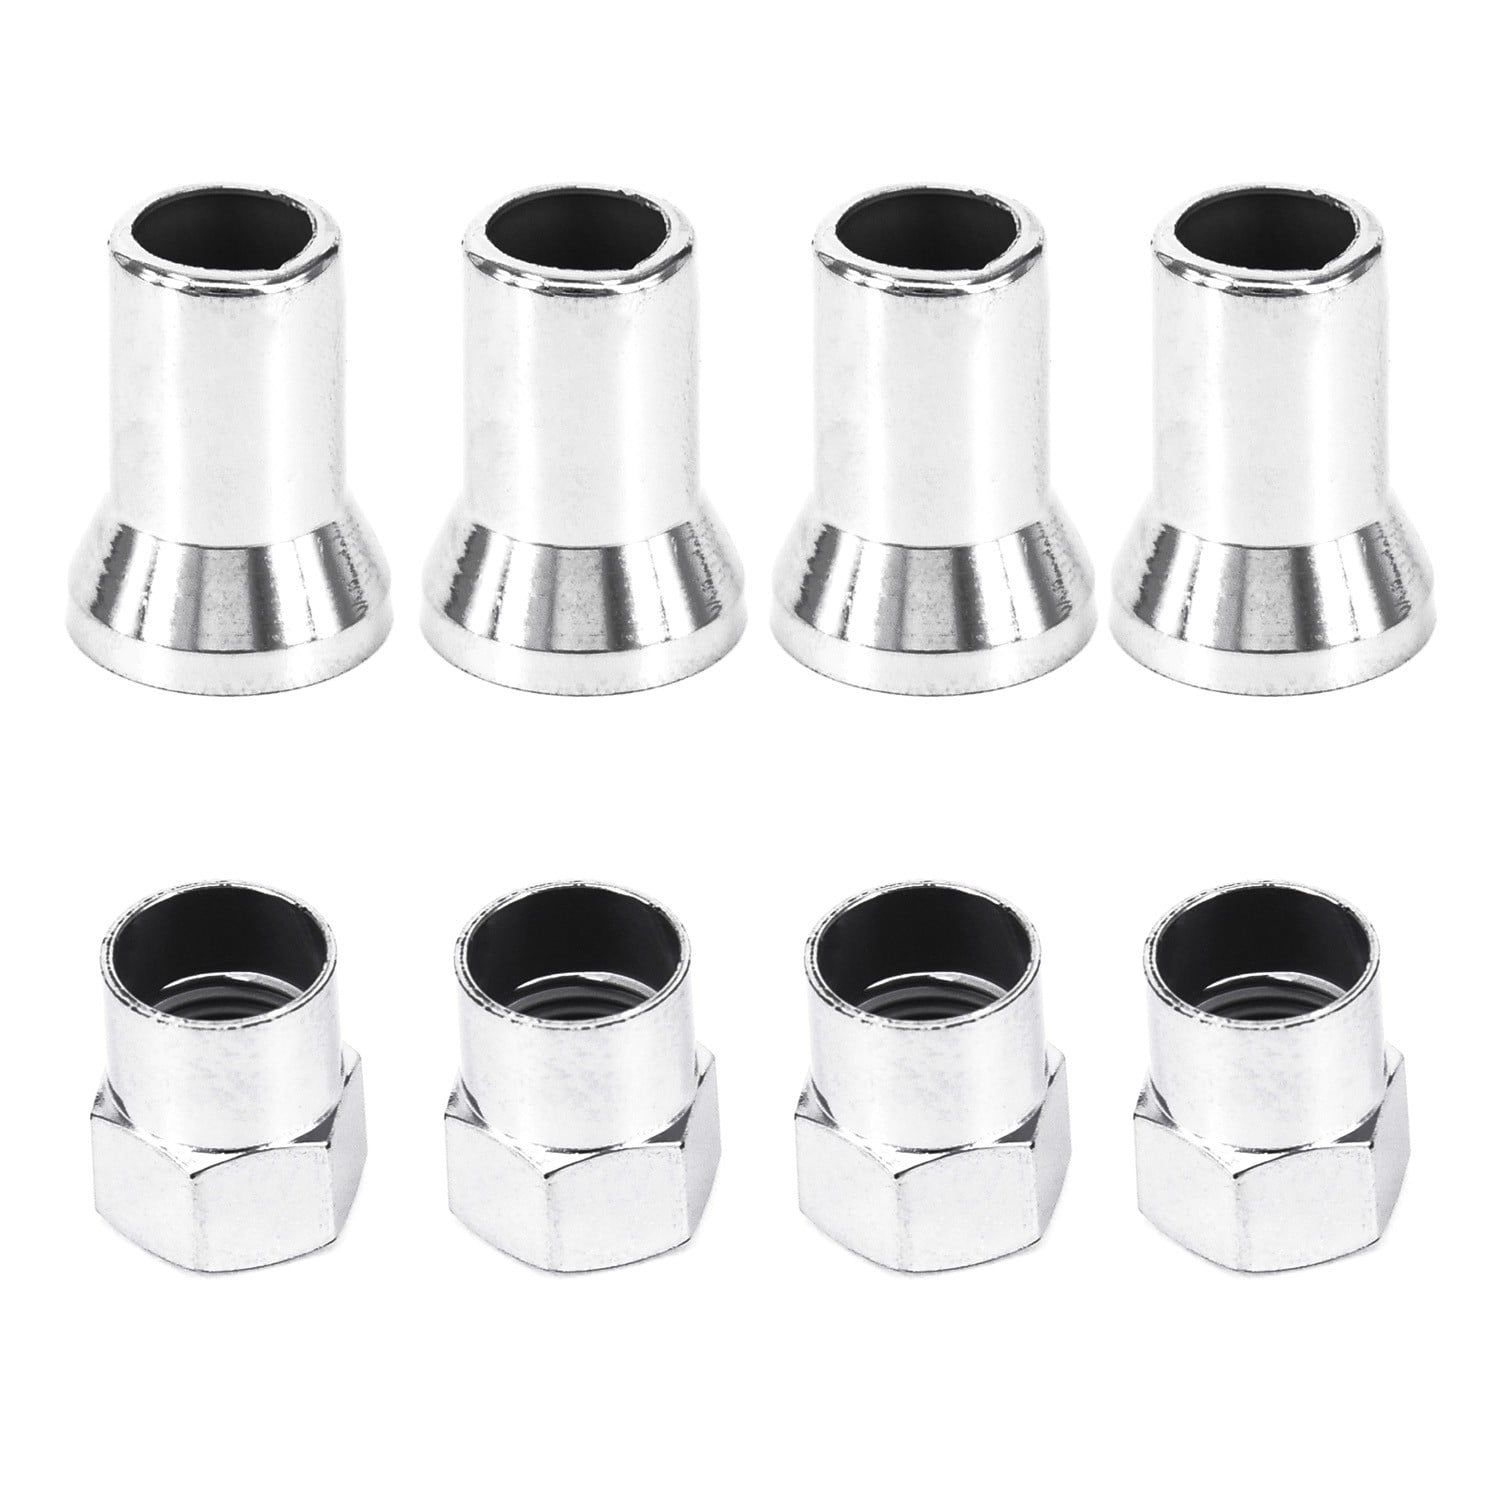 4x Tpms Tire Valve Stem Cap With Sleeve Cover Chrome American Car Truck Silver 